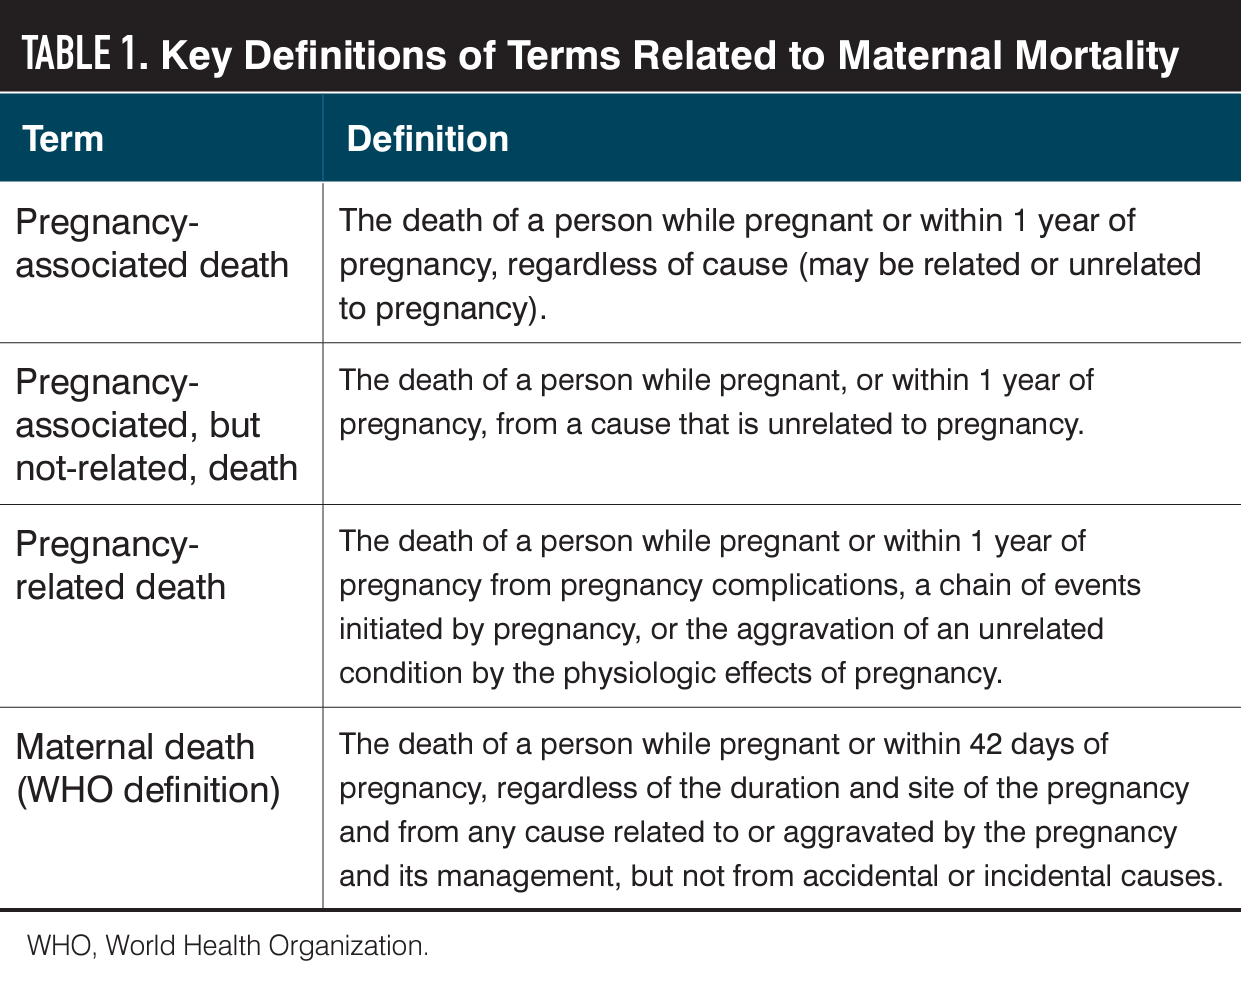 Key Definitions of Terms Related to Maternal Mortality 